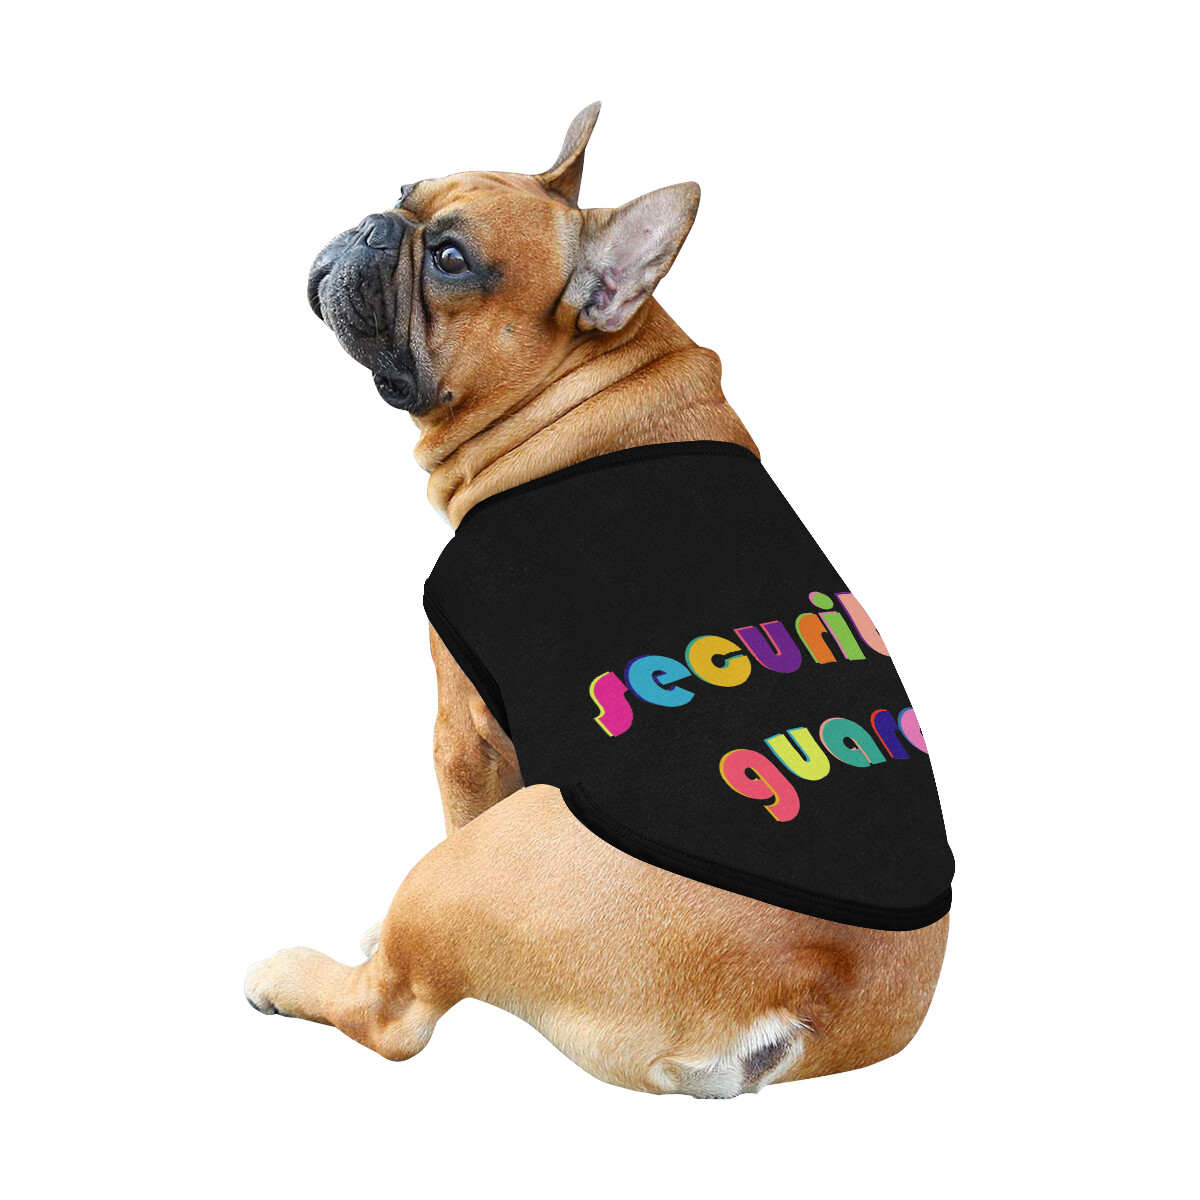 🐕 Security Guard Dog shirt, Dog Tank Top, Dog t-shirt, Dog clothes, Gifts, front back print, 7 sizes XS to 3XL, dog gifts, black